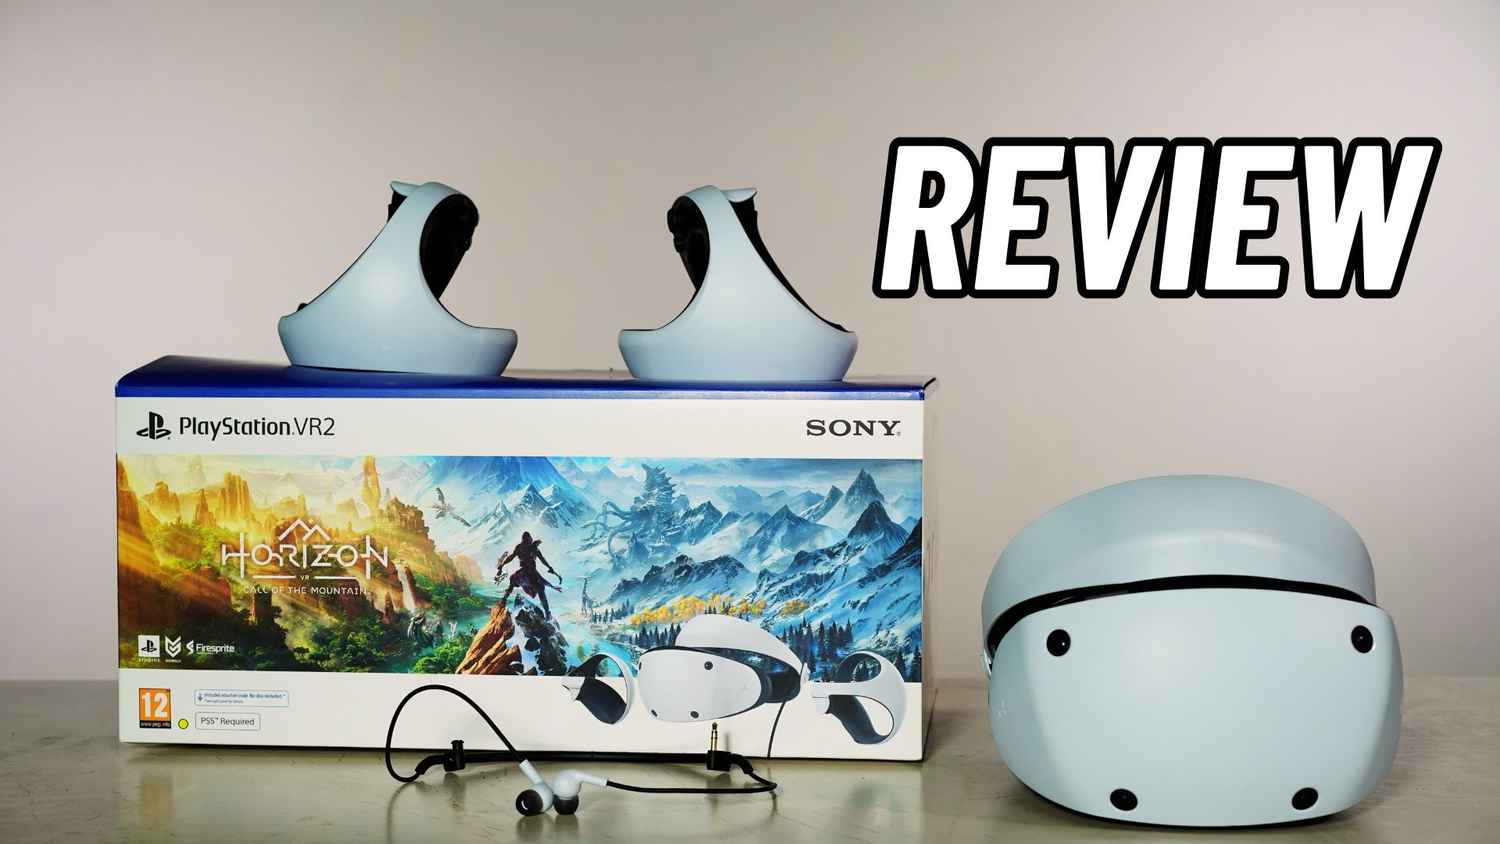 Sony PlayStation VR 2 (PS VR 2) review